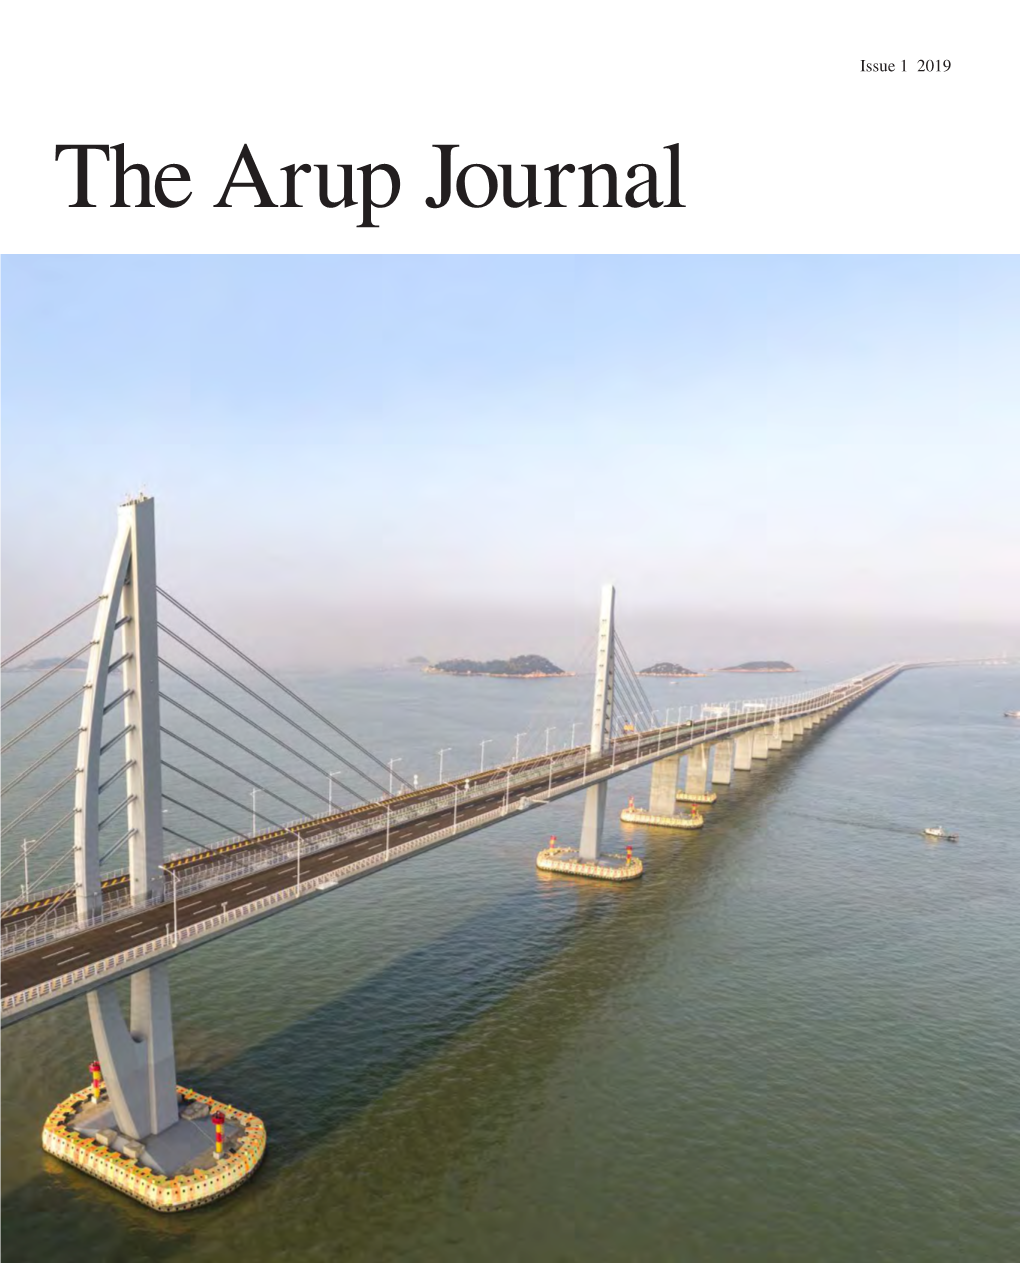 The Arup Journal Contents